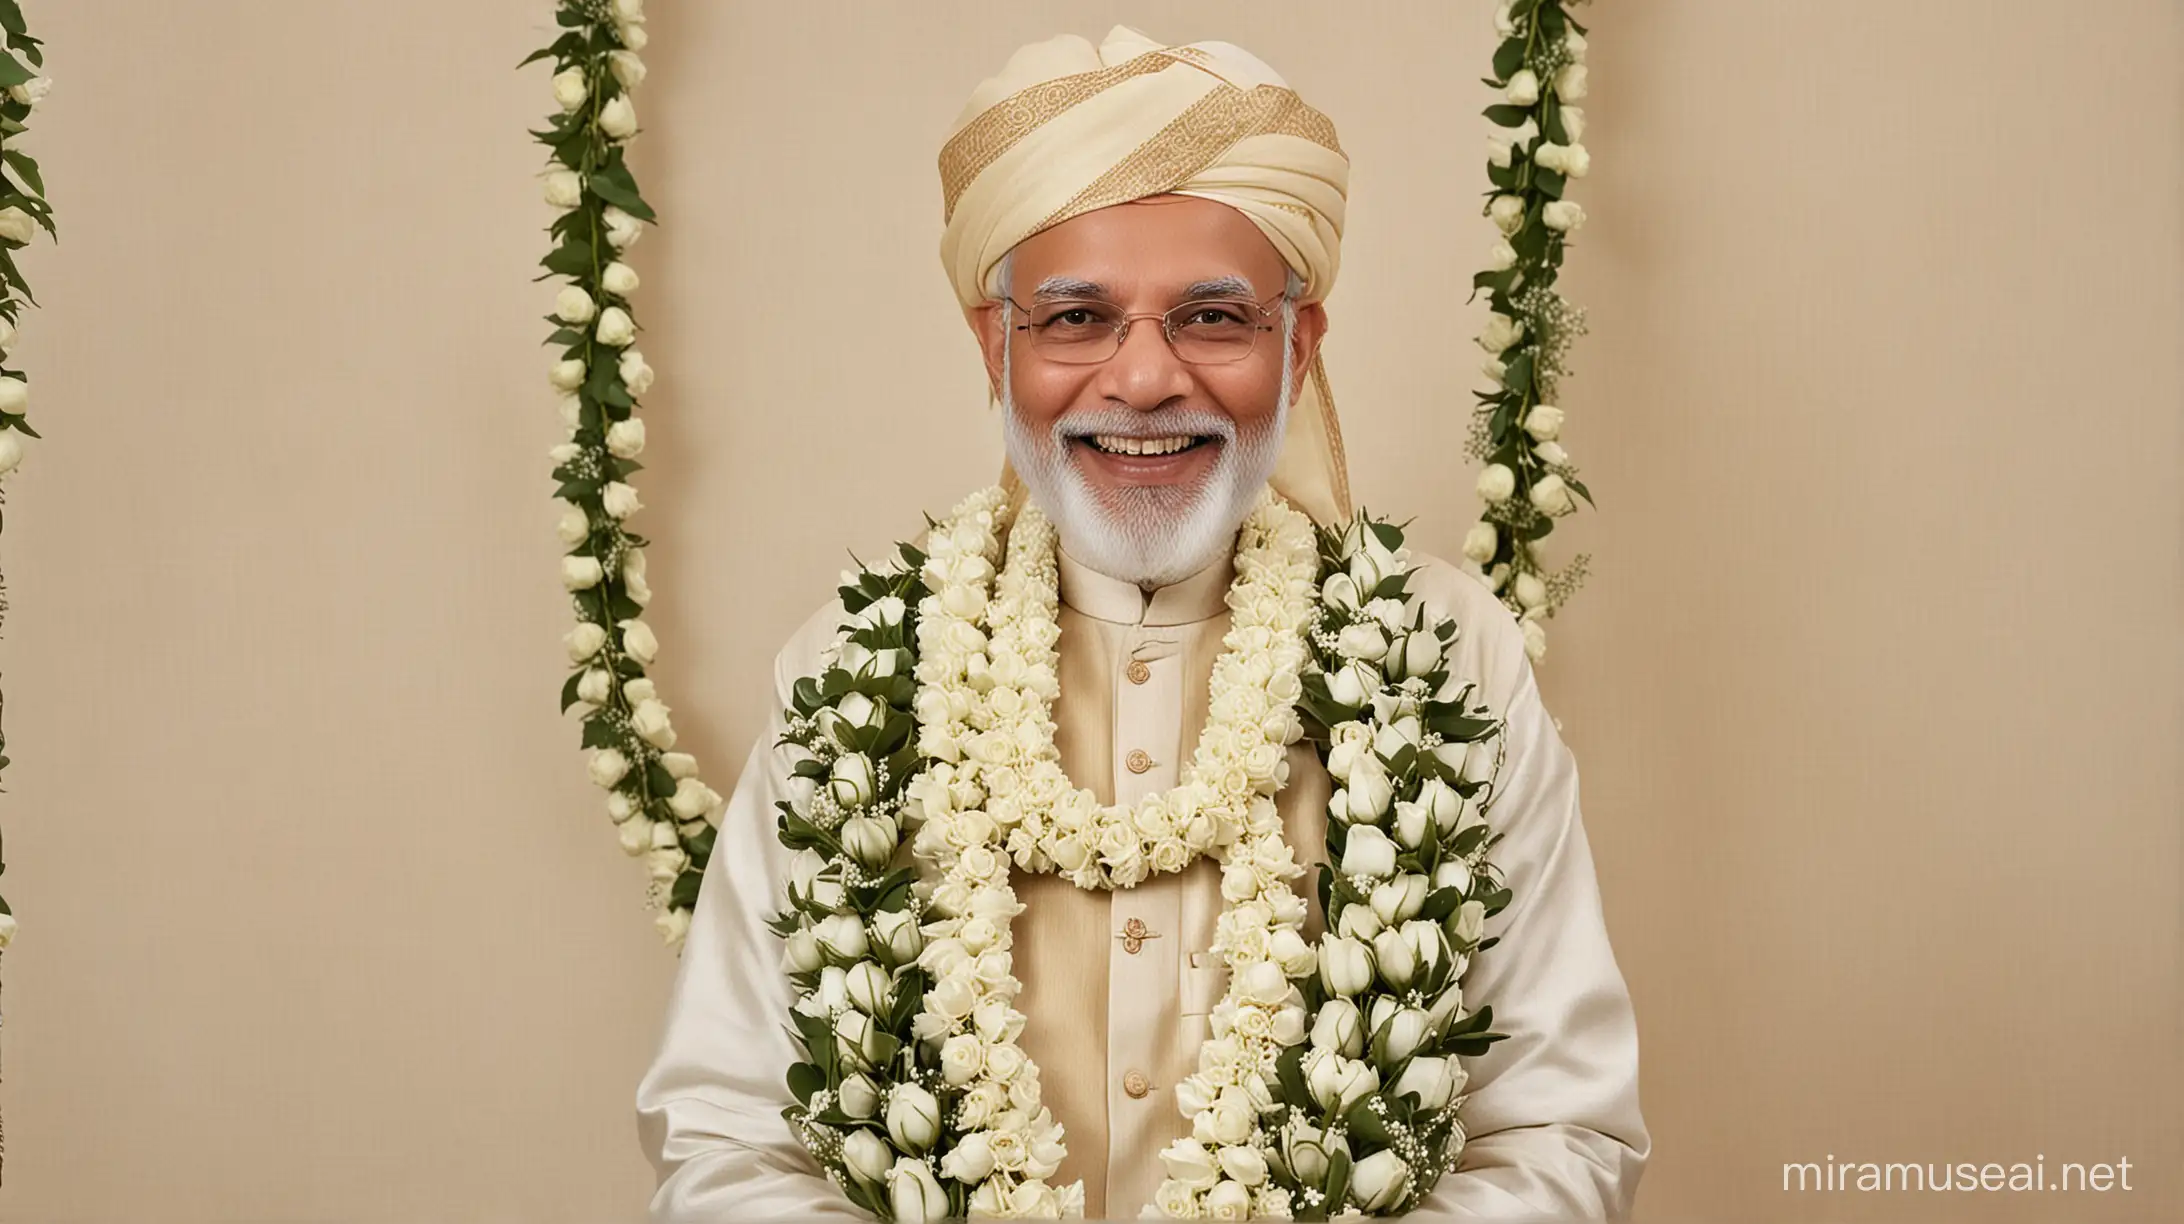 Narendra Modi, Indian prime minister , wearing traditional indian groom outfit, smiling , holding a garland of white roses, looking a little eager to marry